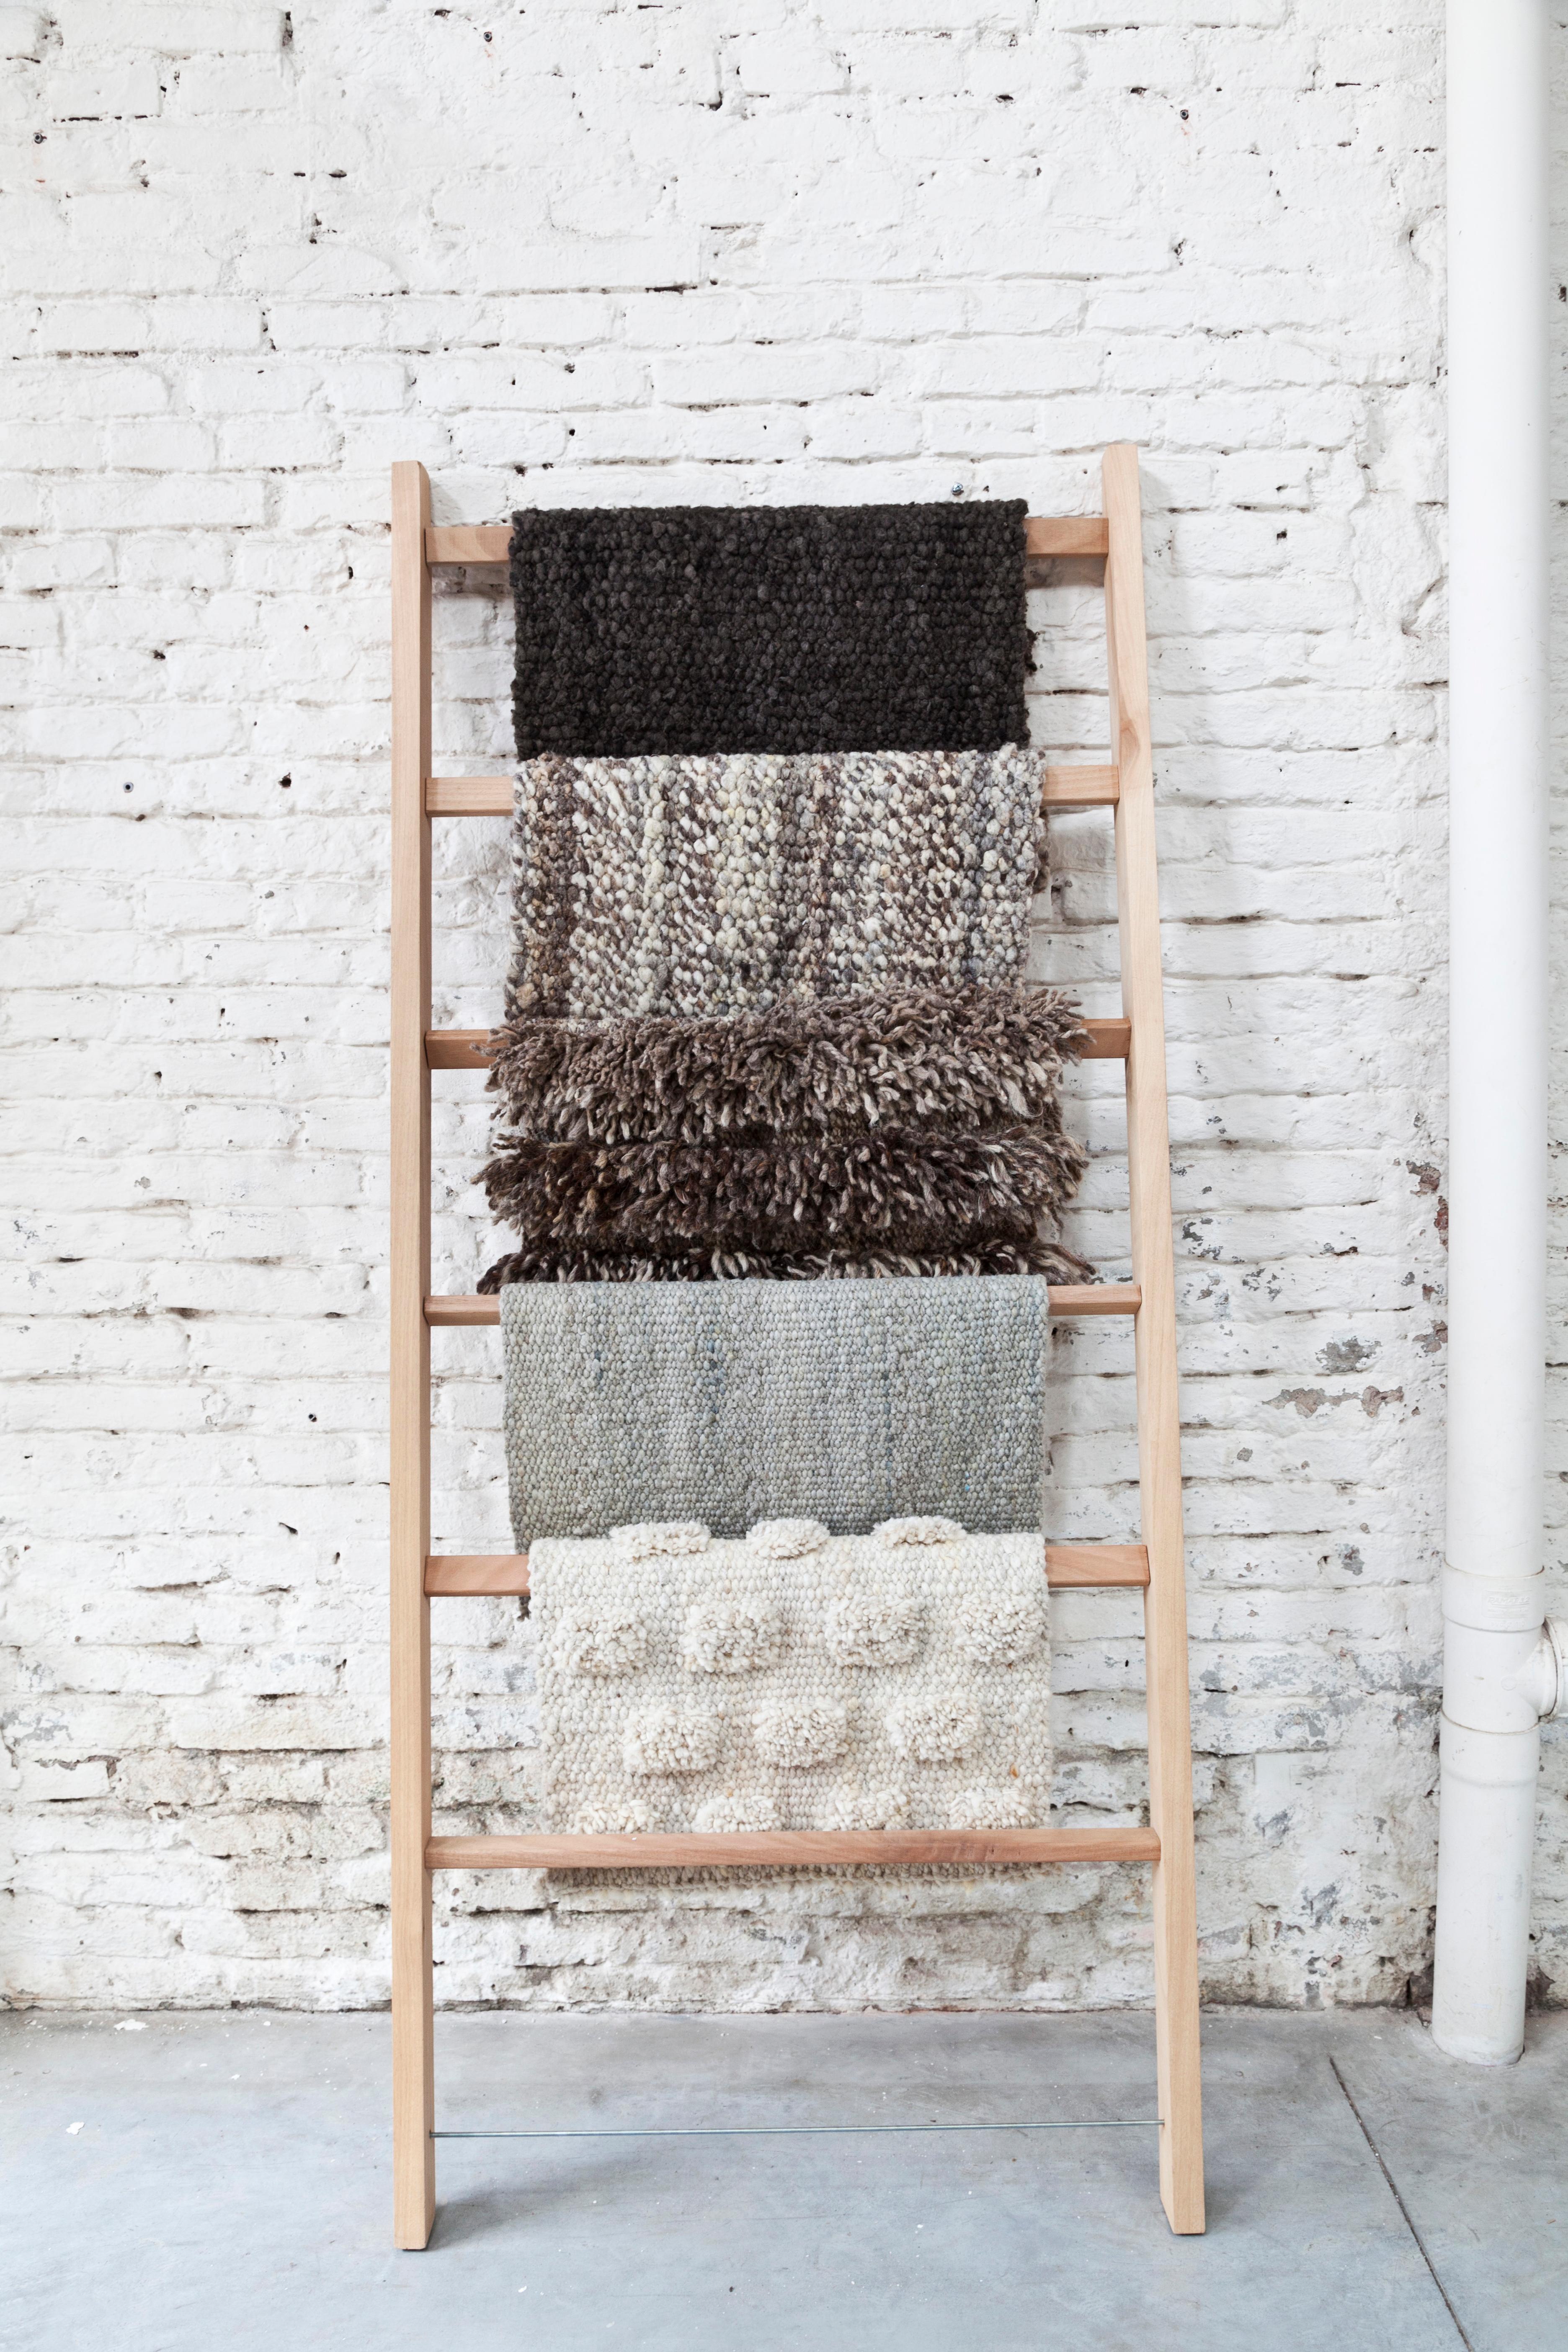 We are honored to carry and work with the amazing team and artisans from Awanay, in Argentina, to create one of a kind handwoven wool rugs, all made to order and highly customizable. Their unique and textural look and feel make them perfect for any